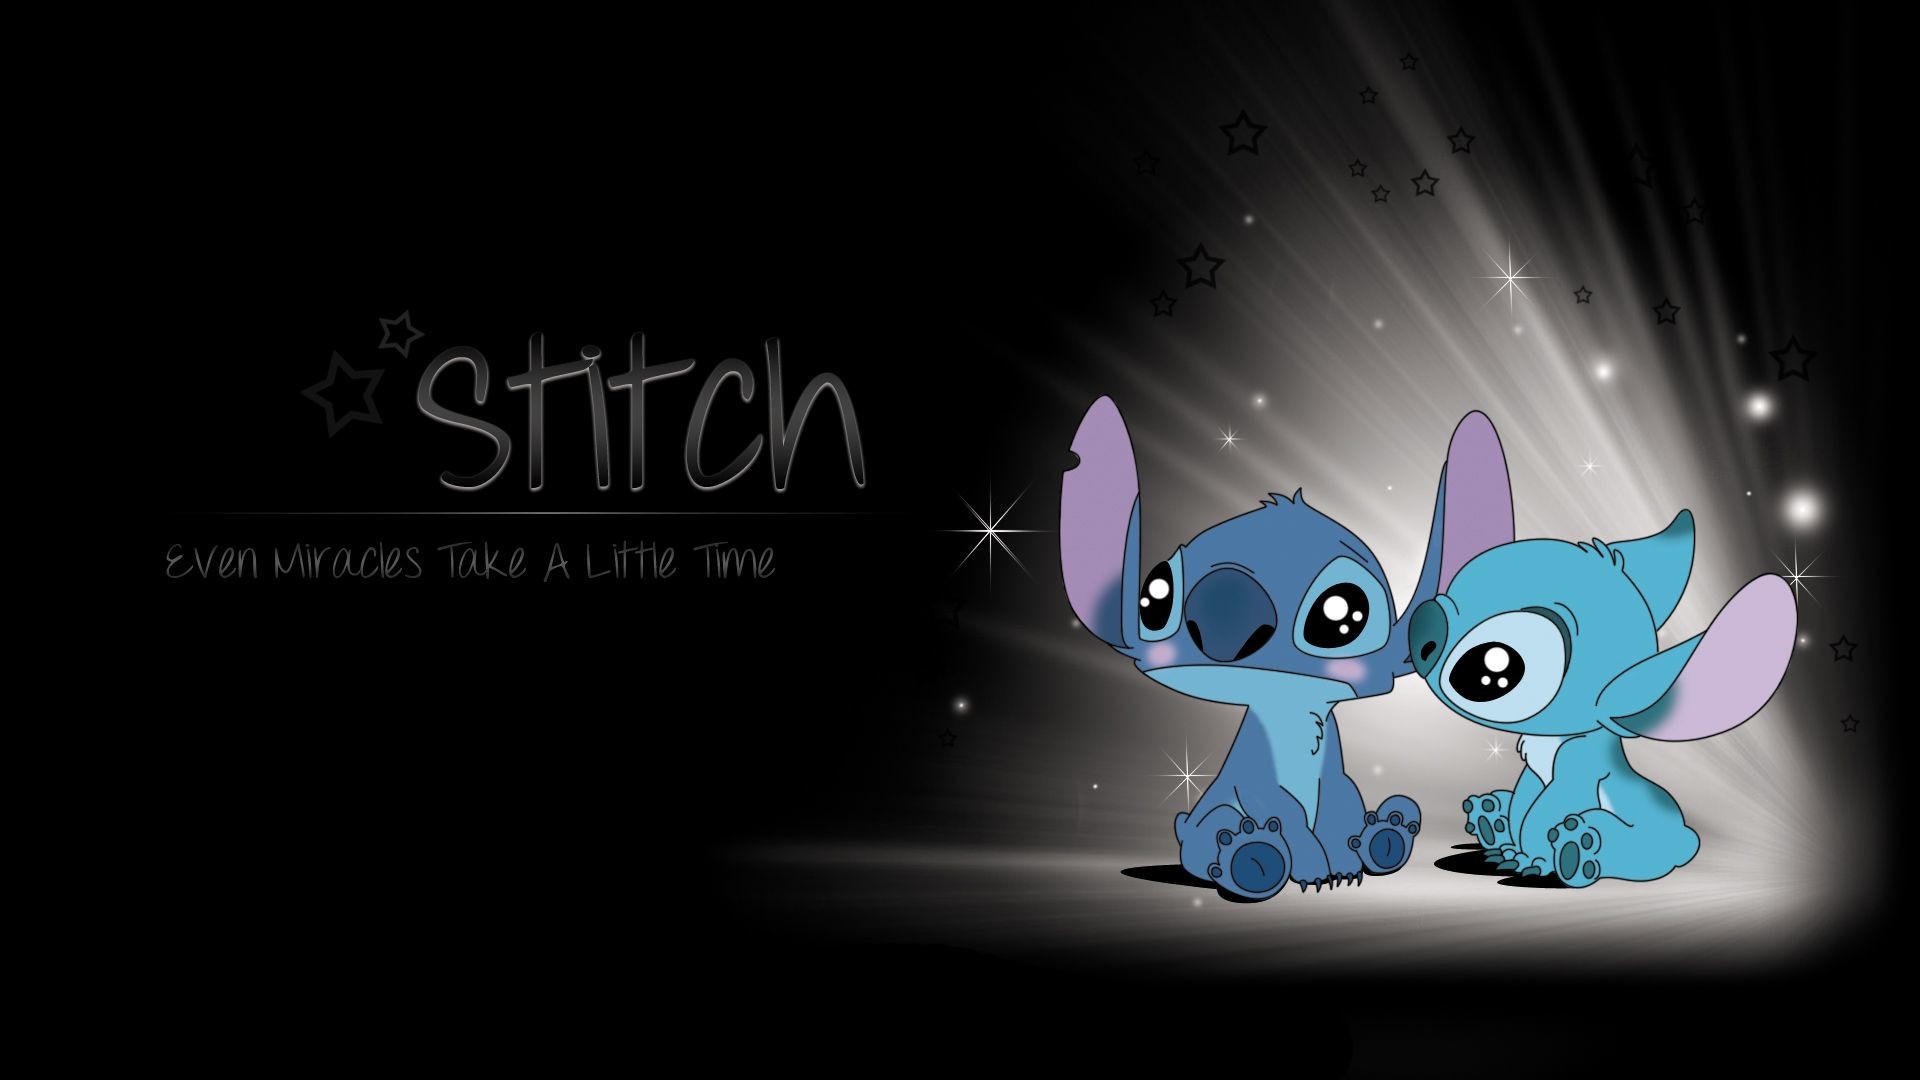 Download Explore the depths of the Stitch Galaxy and uncover its secrets  Wallpaper  Wallpaperscom